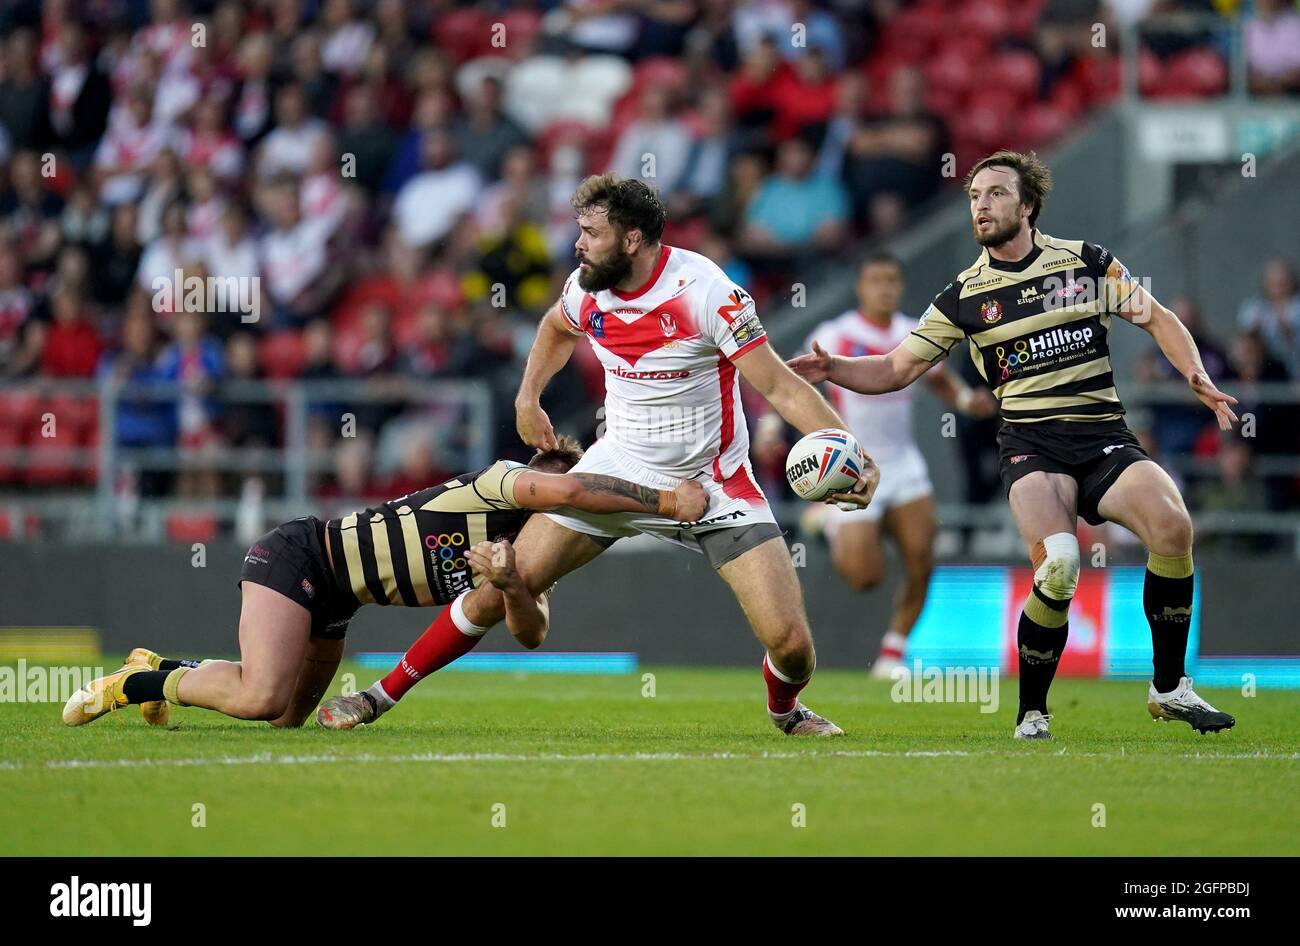 St Helens’ Alex Walmsley is tackled by Leigh Centurions’ Keanan Brand during the Betfred Super League match at the Totally Wicked Stadium, St. Helens. Picture date: Thursday August 26, 2021. Stock Photo